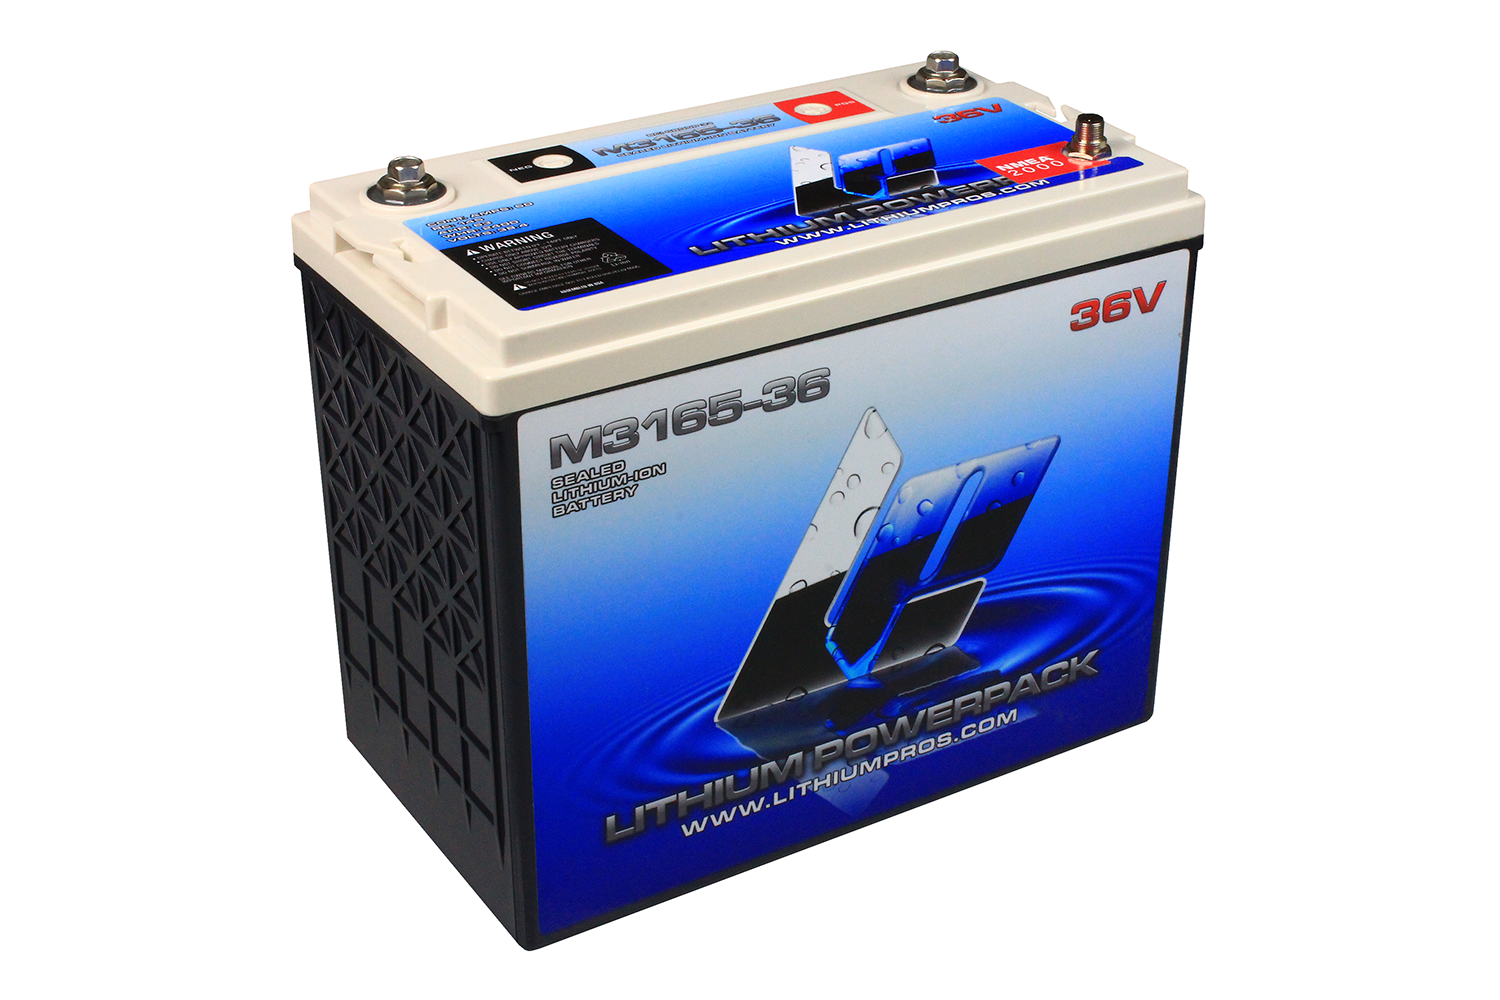 <p><b>Lithium Pros M3165-36 Lithium-ion Battery</b></p>
<p>Replace three Group 31 marine AGM batteries with ONE M3165-36 Lithium-ion battery. This is a perfect fit for most bass boats and other shallow water fishing boats where weight is a premium. Itâs a fast and easy way to take 189 pounds out of the boat and have more storage space. Yes, you read that correctly. Itâs the same as leaving your co-angler on the dock (or the marshal, your choice.)  A lighter boat is faster and more fuel efficient and can get into more places.  Catch fish where your competitors canât. This 36V 65Ah Trolling Battery features 150 reserve minutes, or enough power for extended trolling in one area from daylight to dark.</p>
<p><a href=